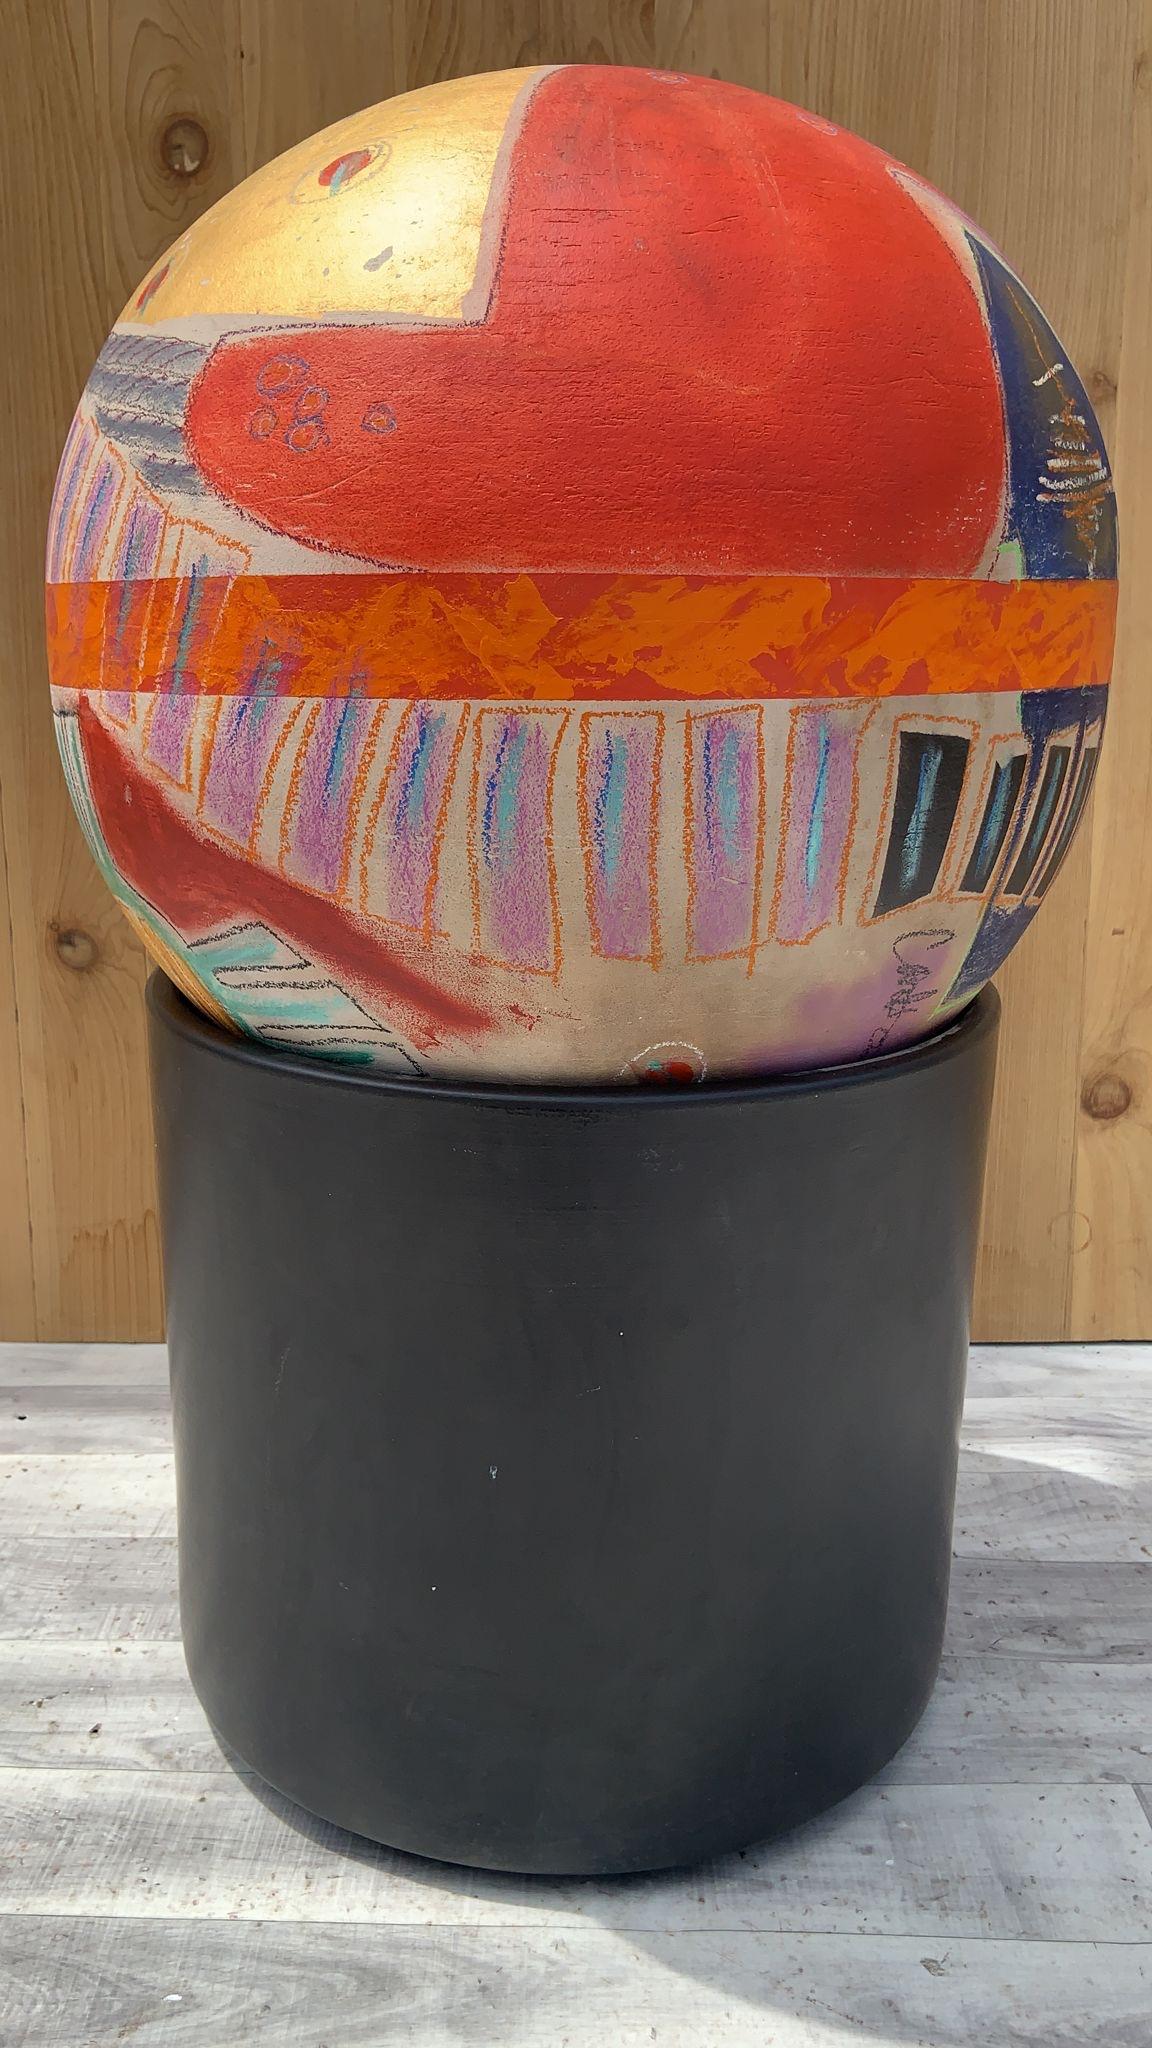 Mid-20th Century Multi Color Ball Sculpture on a Gainey Ceramics Black Clay Planter - 2 Piece Set For Sale